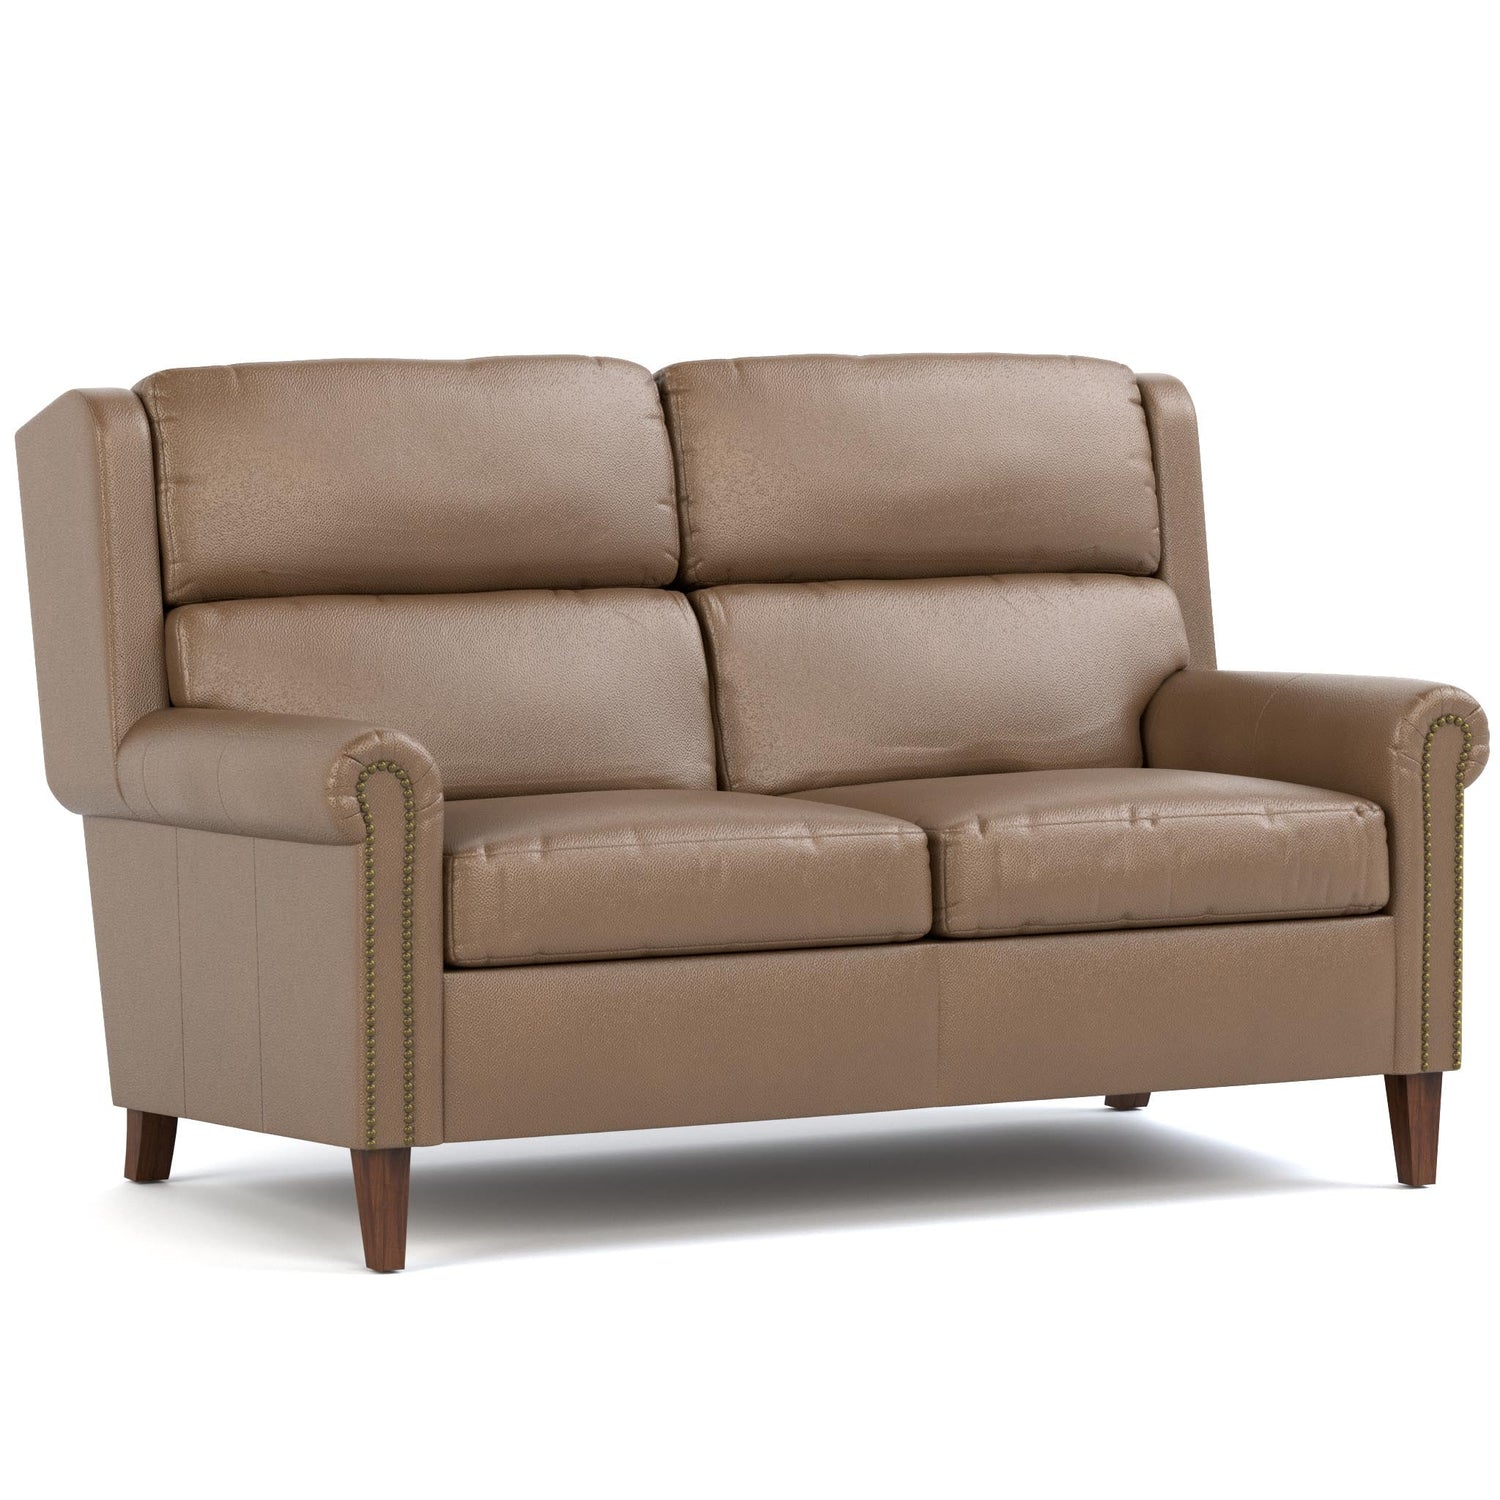 Woodlands Small Roll Arm Loveseat with Nails Selvalo Granite Program